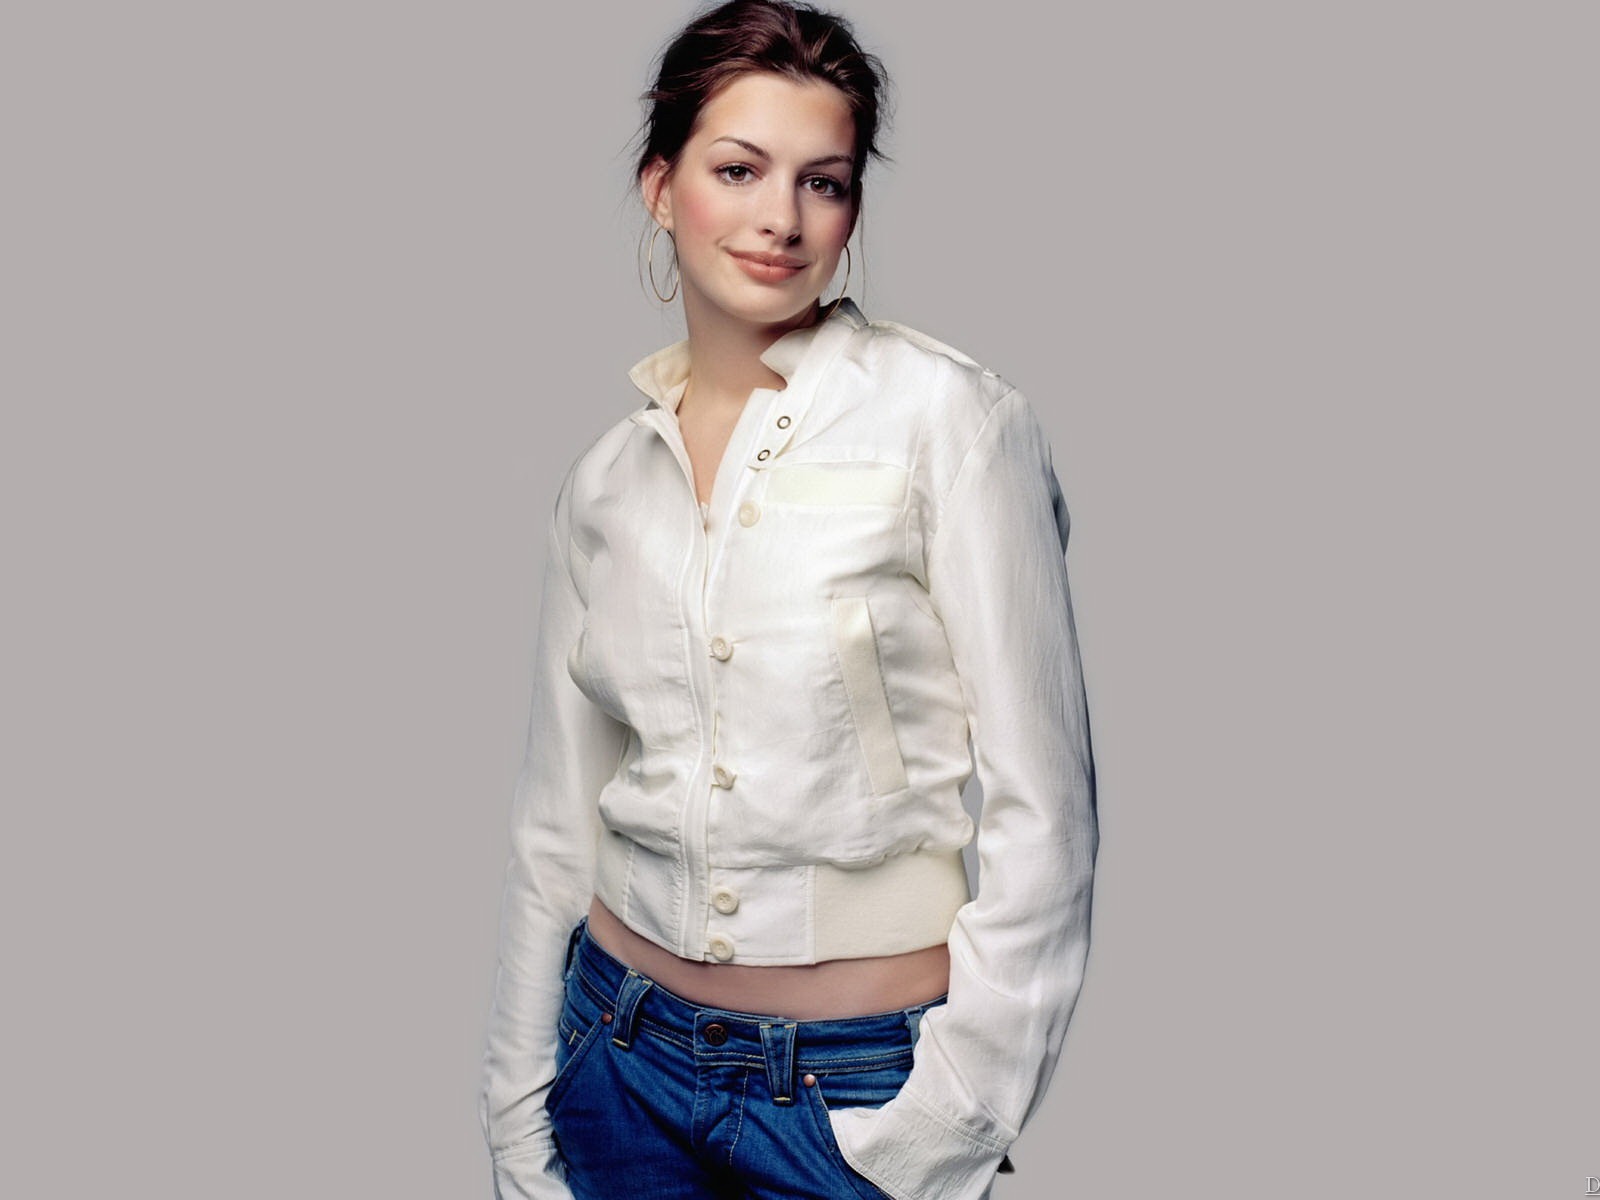 Anne Hathaway #015 - 1600x1200 Wallpapers Pictures Photos Images